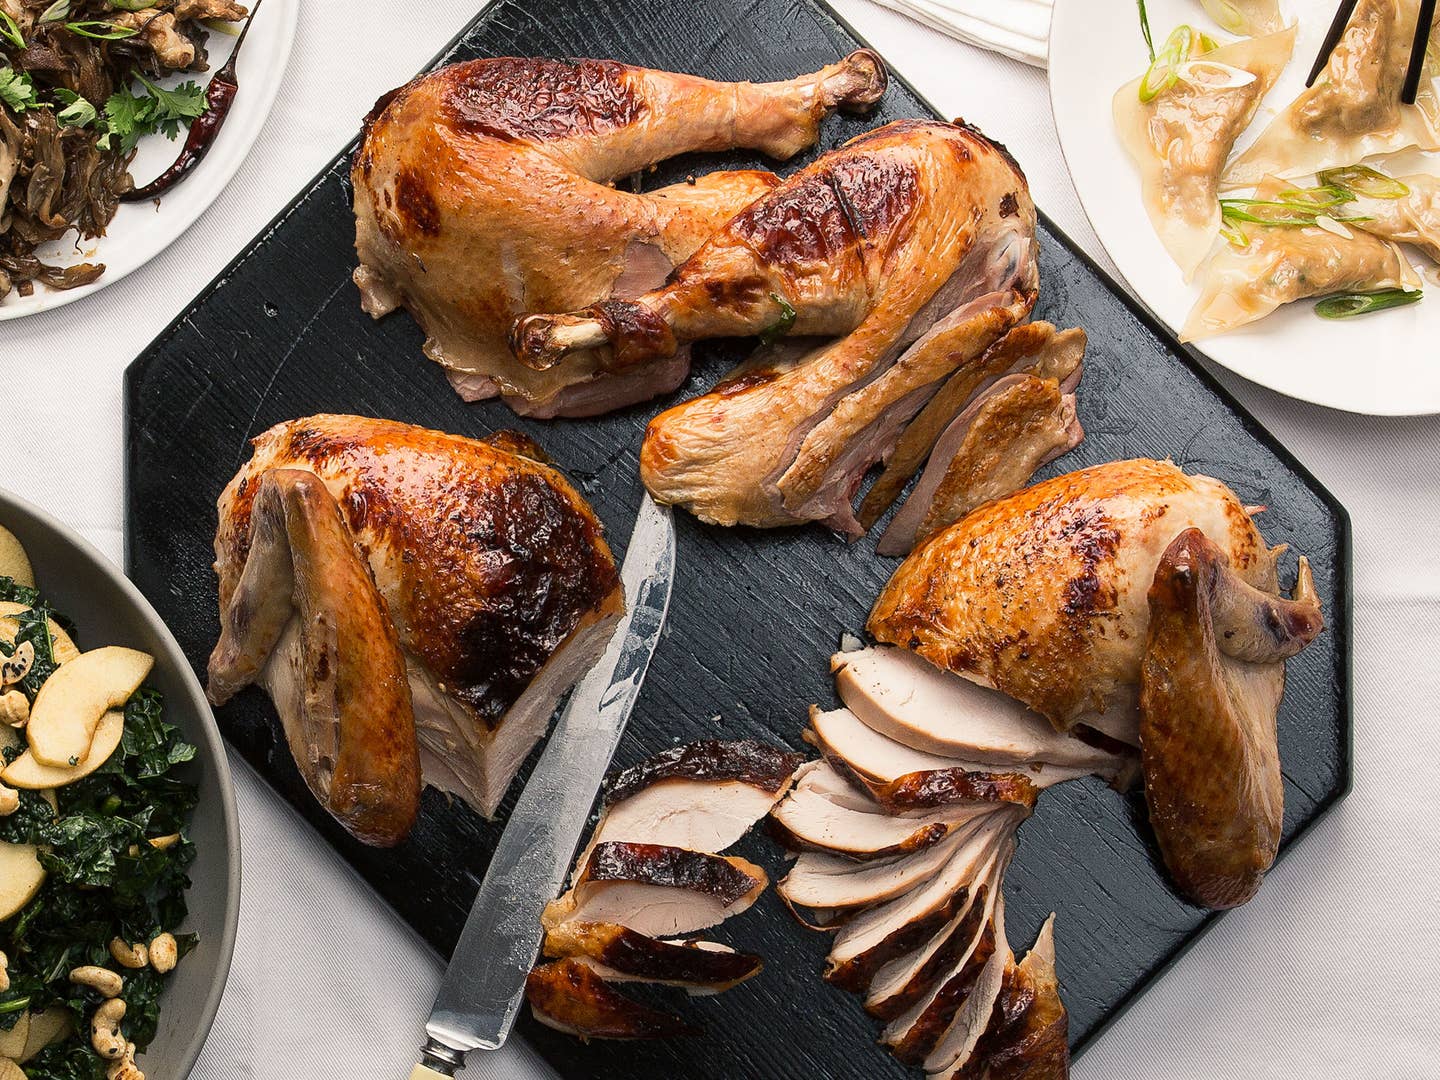 The Best Mail-Order Turkeys for Your Thanksgiving Table